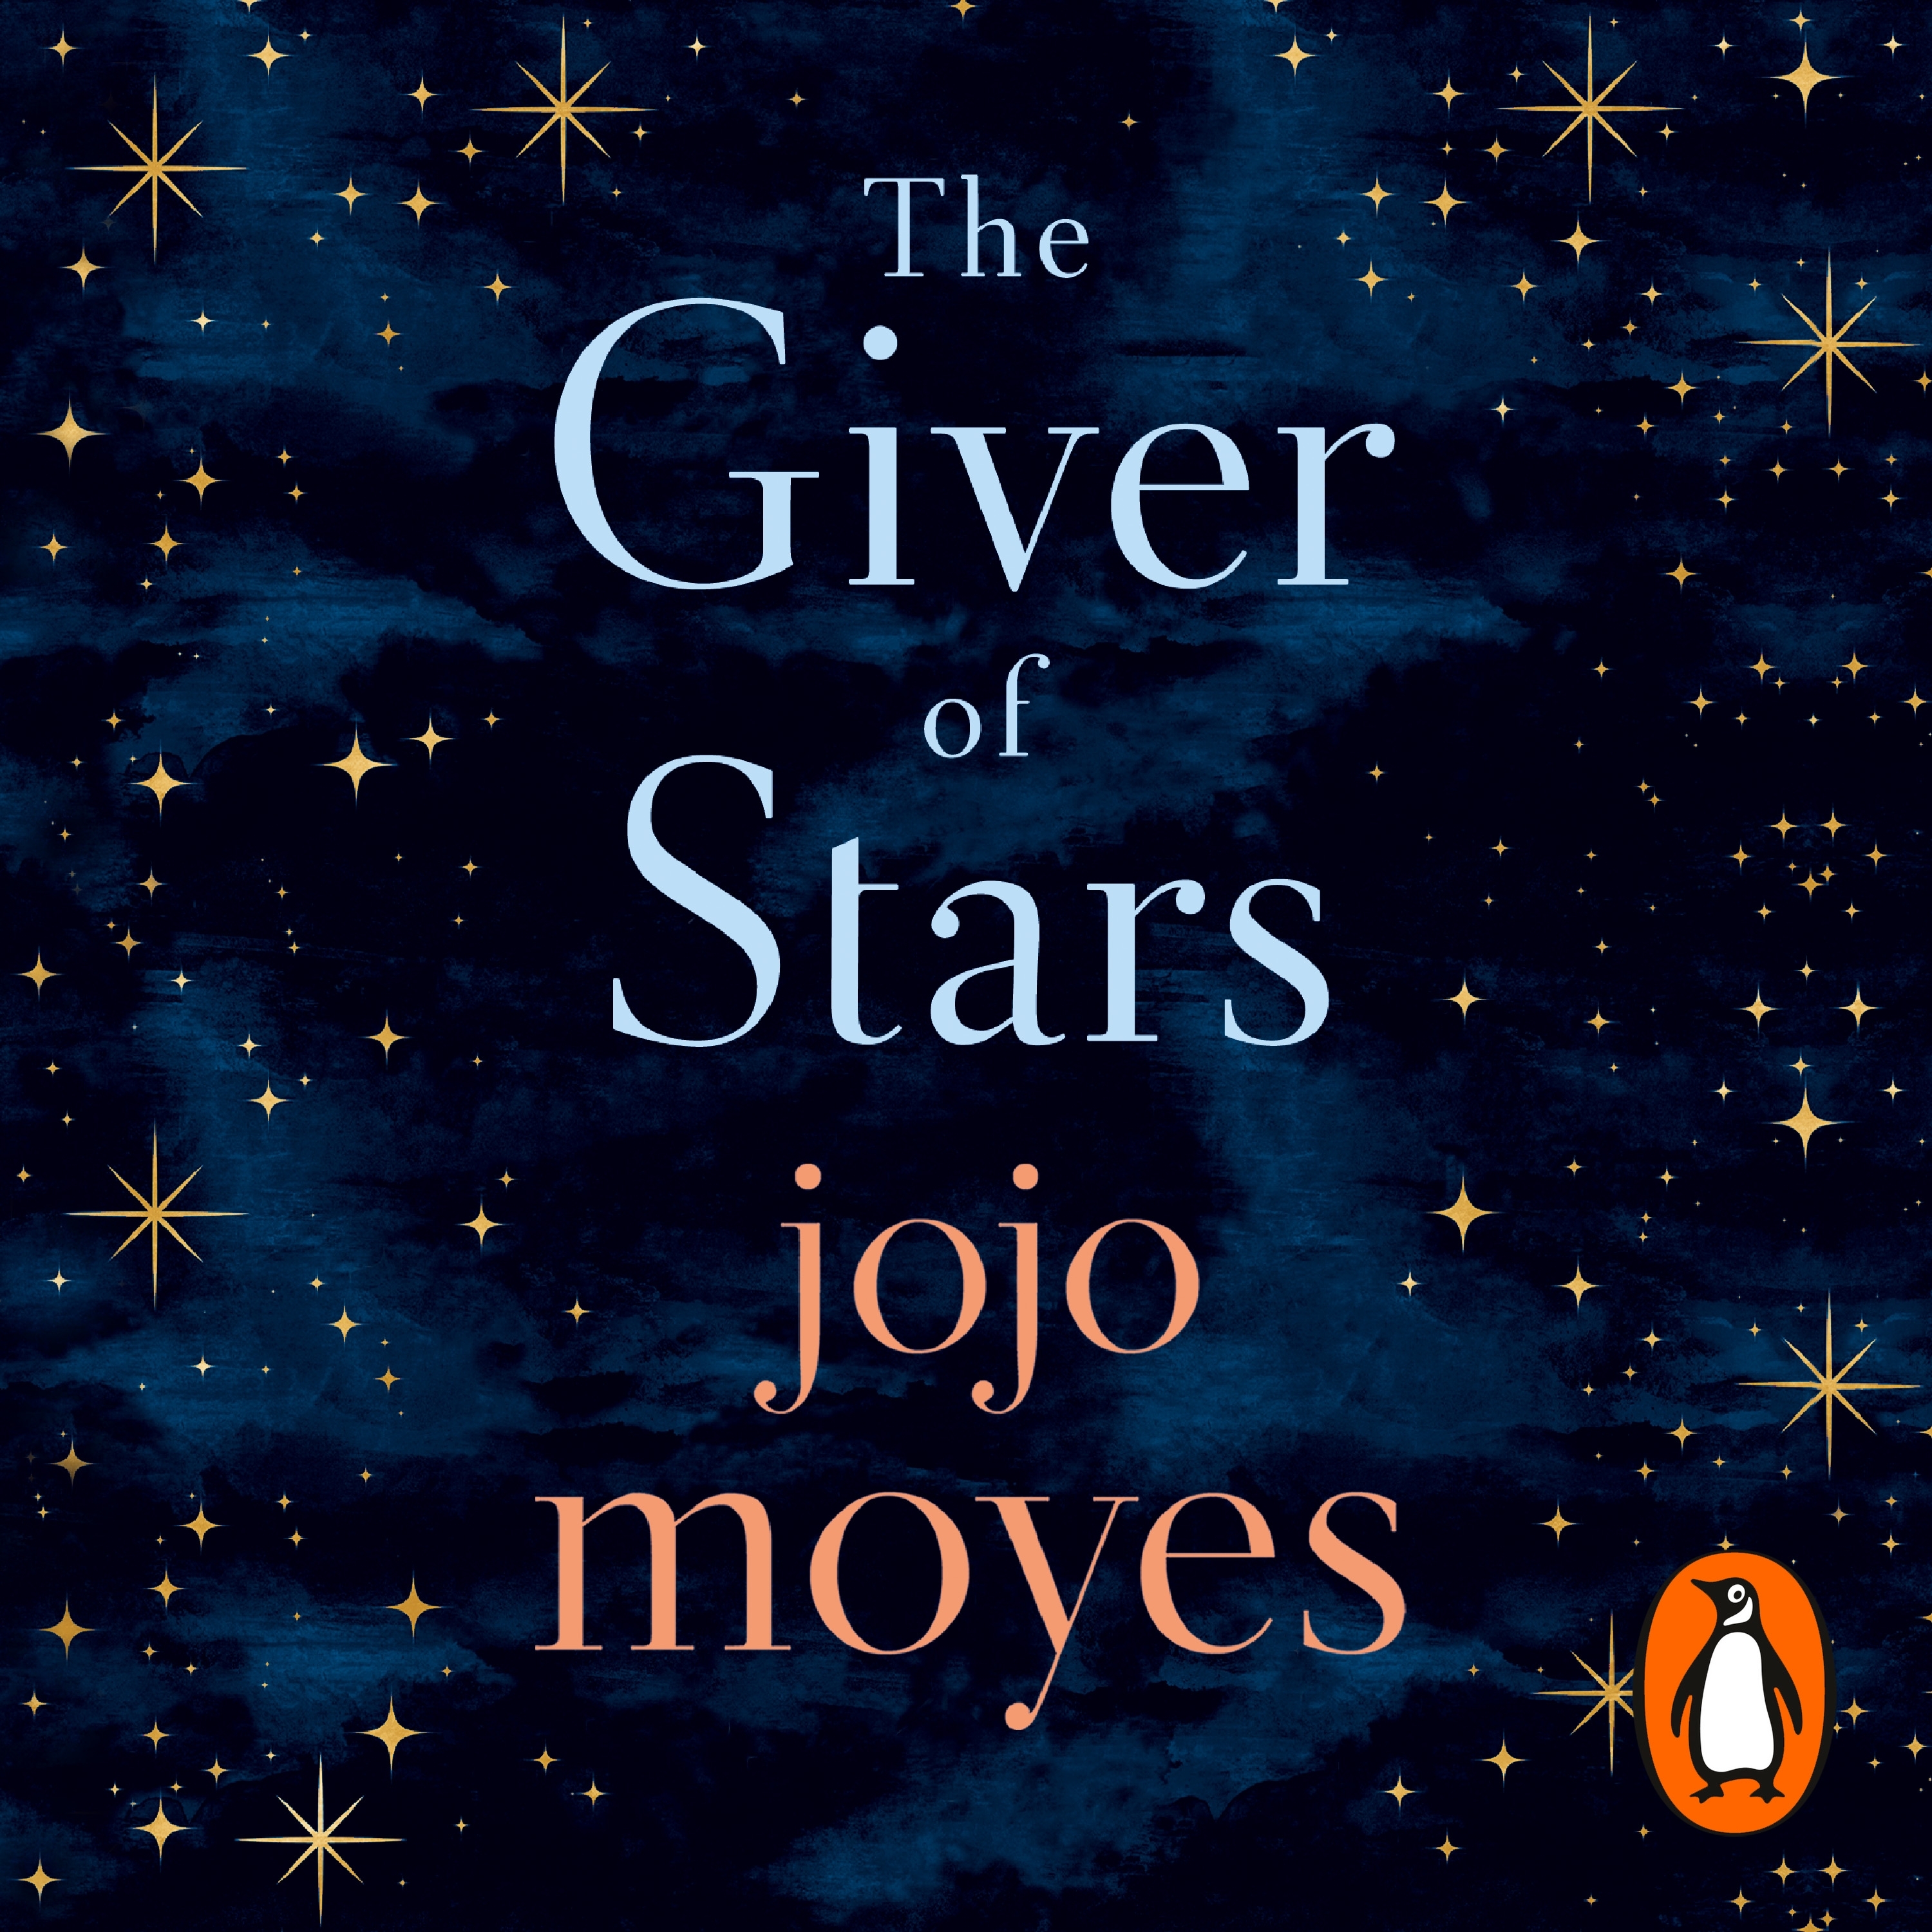 book review for the giver of stars